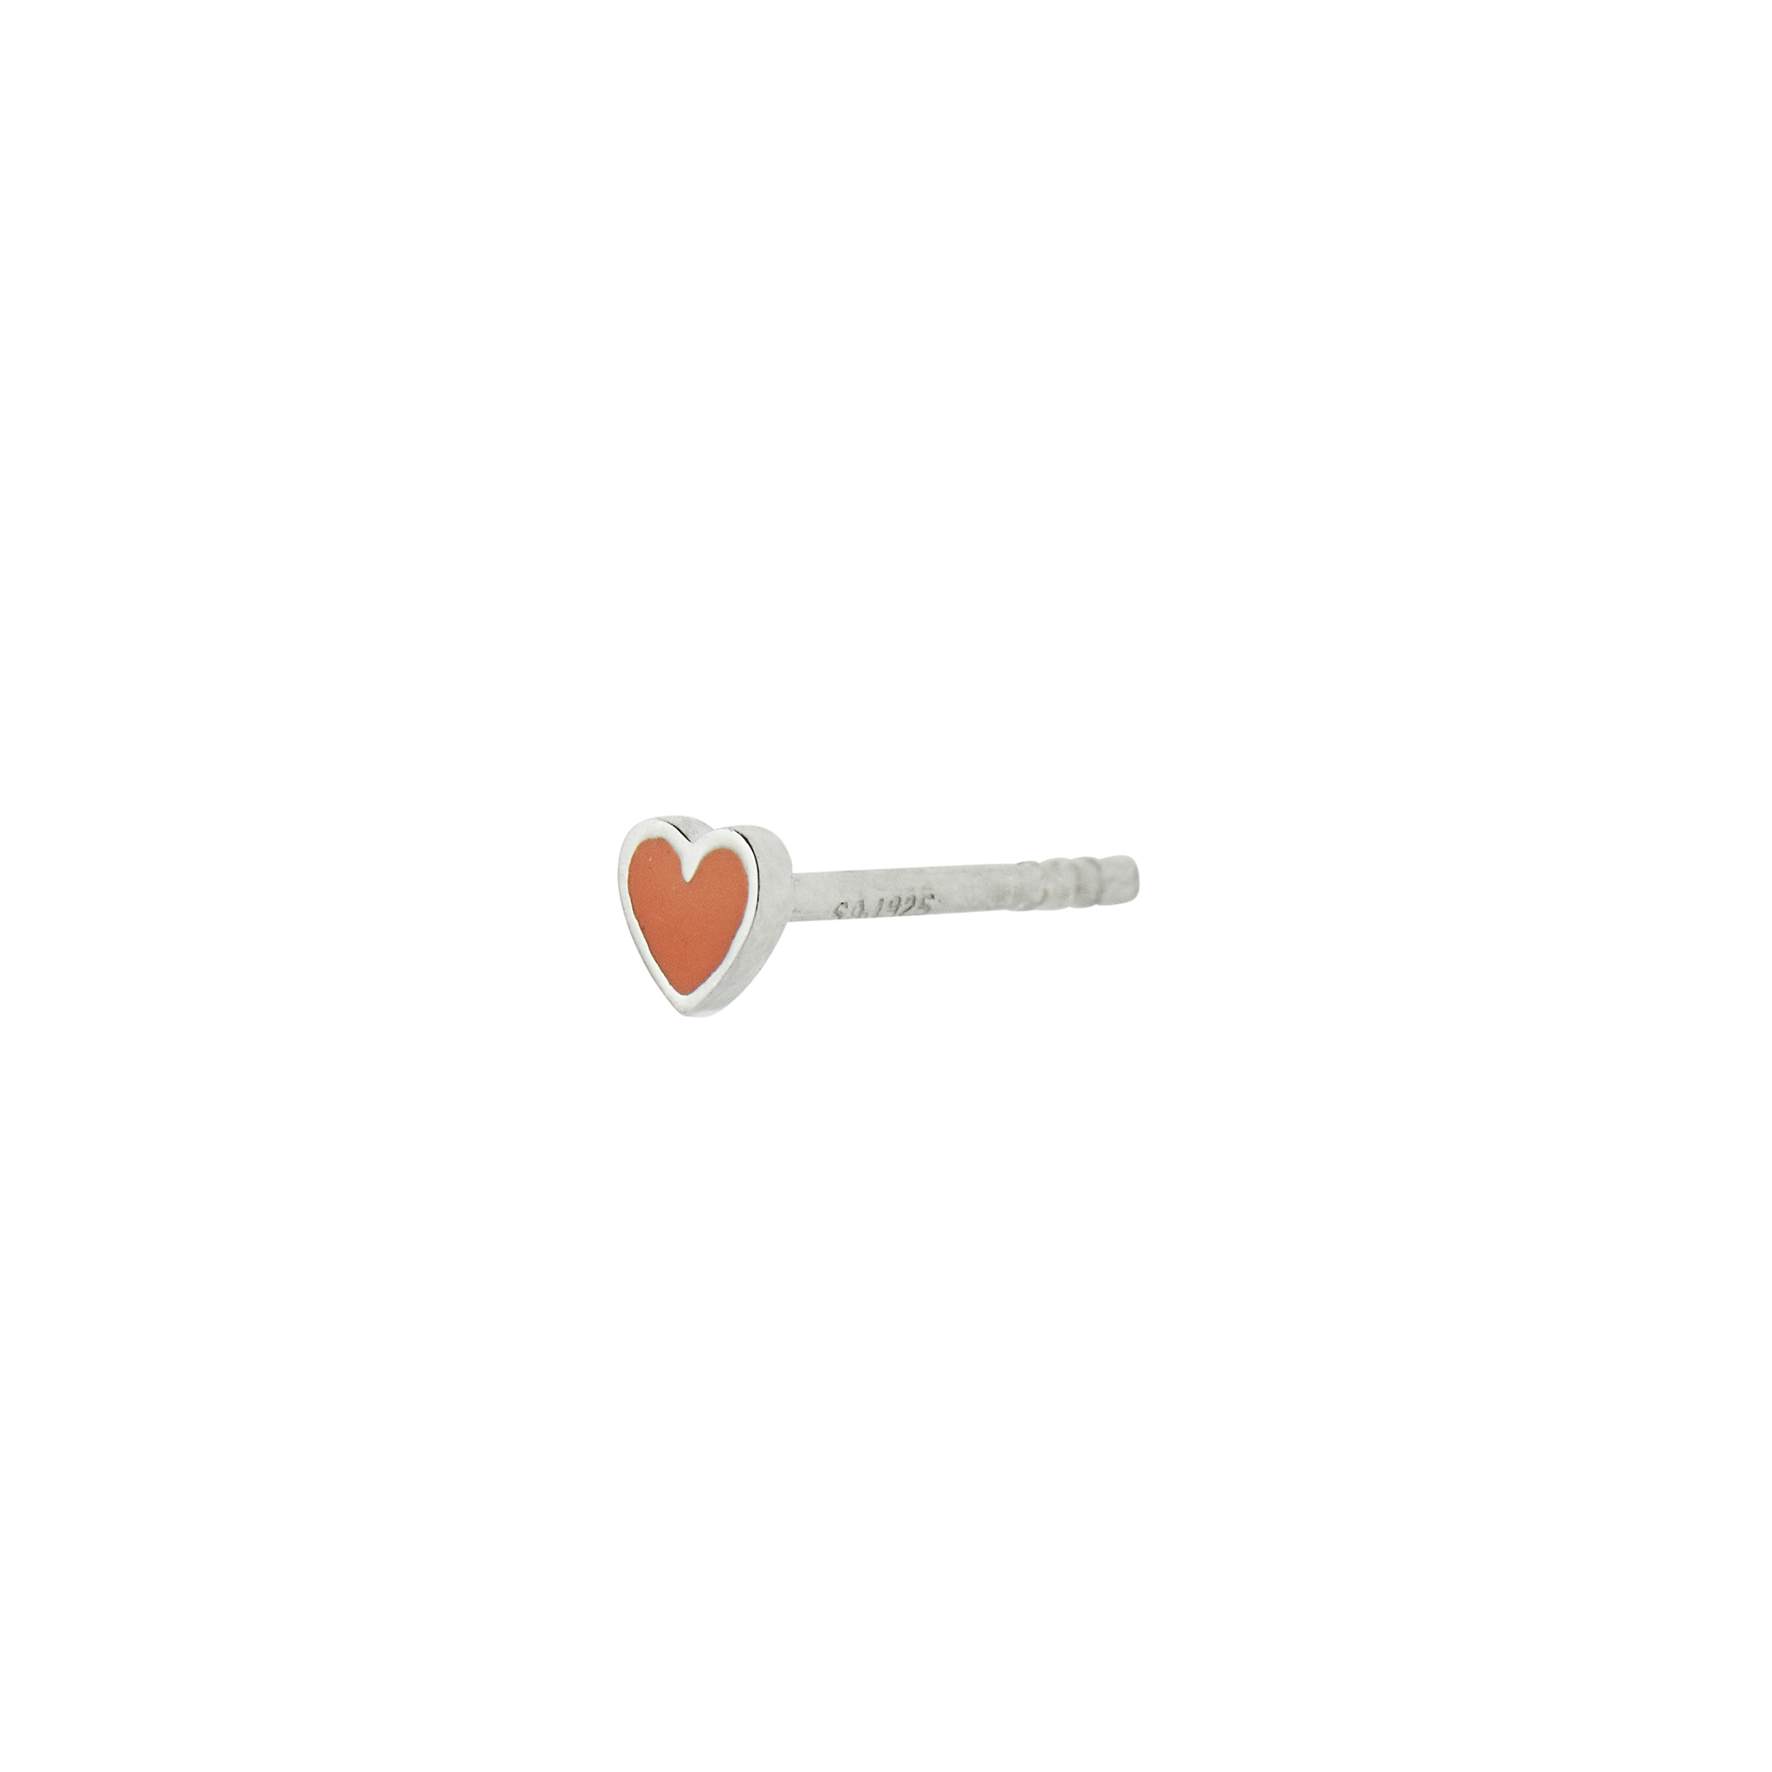 Petit Love Heart Coral von STINE A Jewelry in Silber Sterling 925